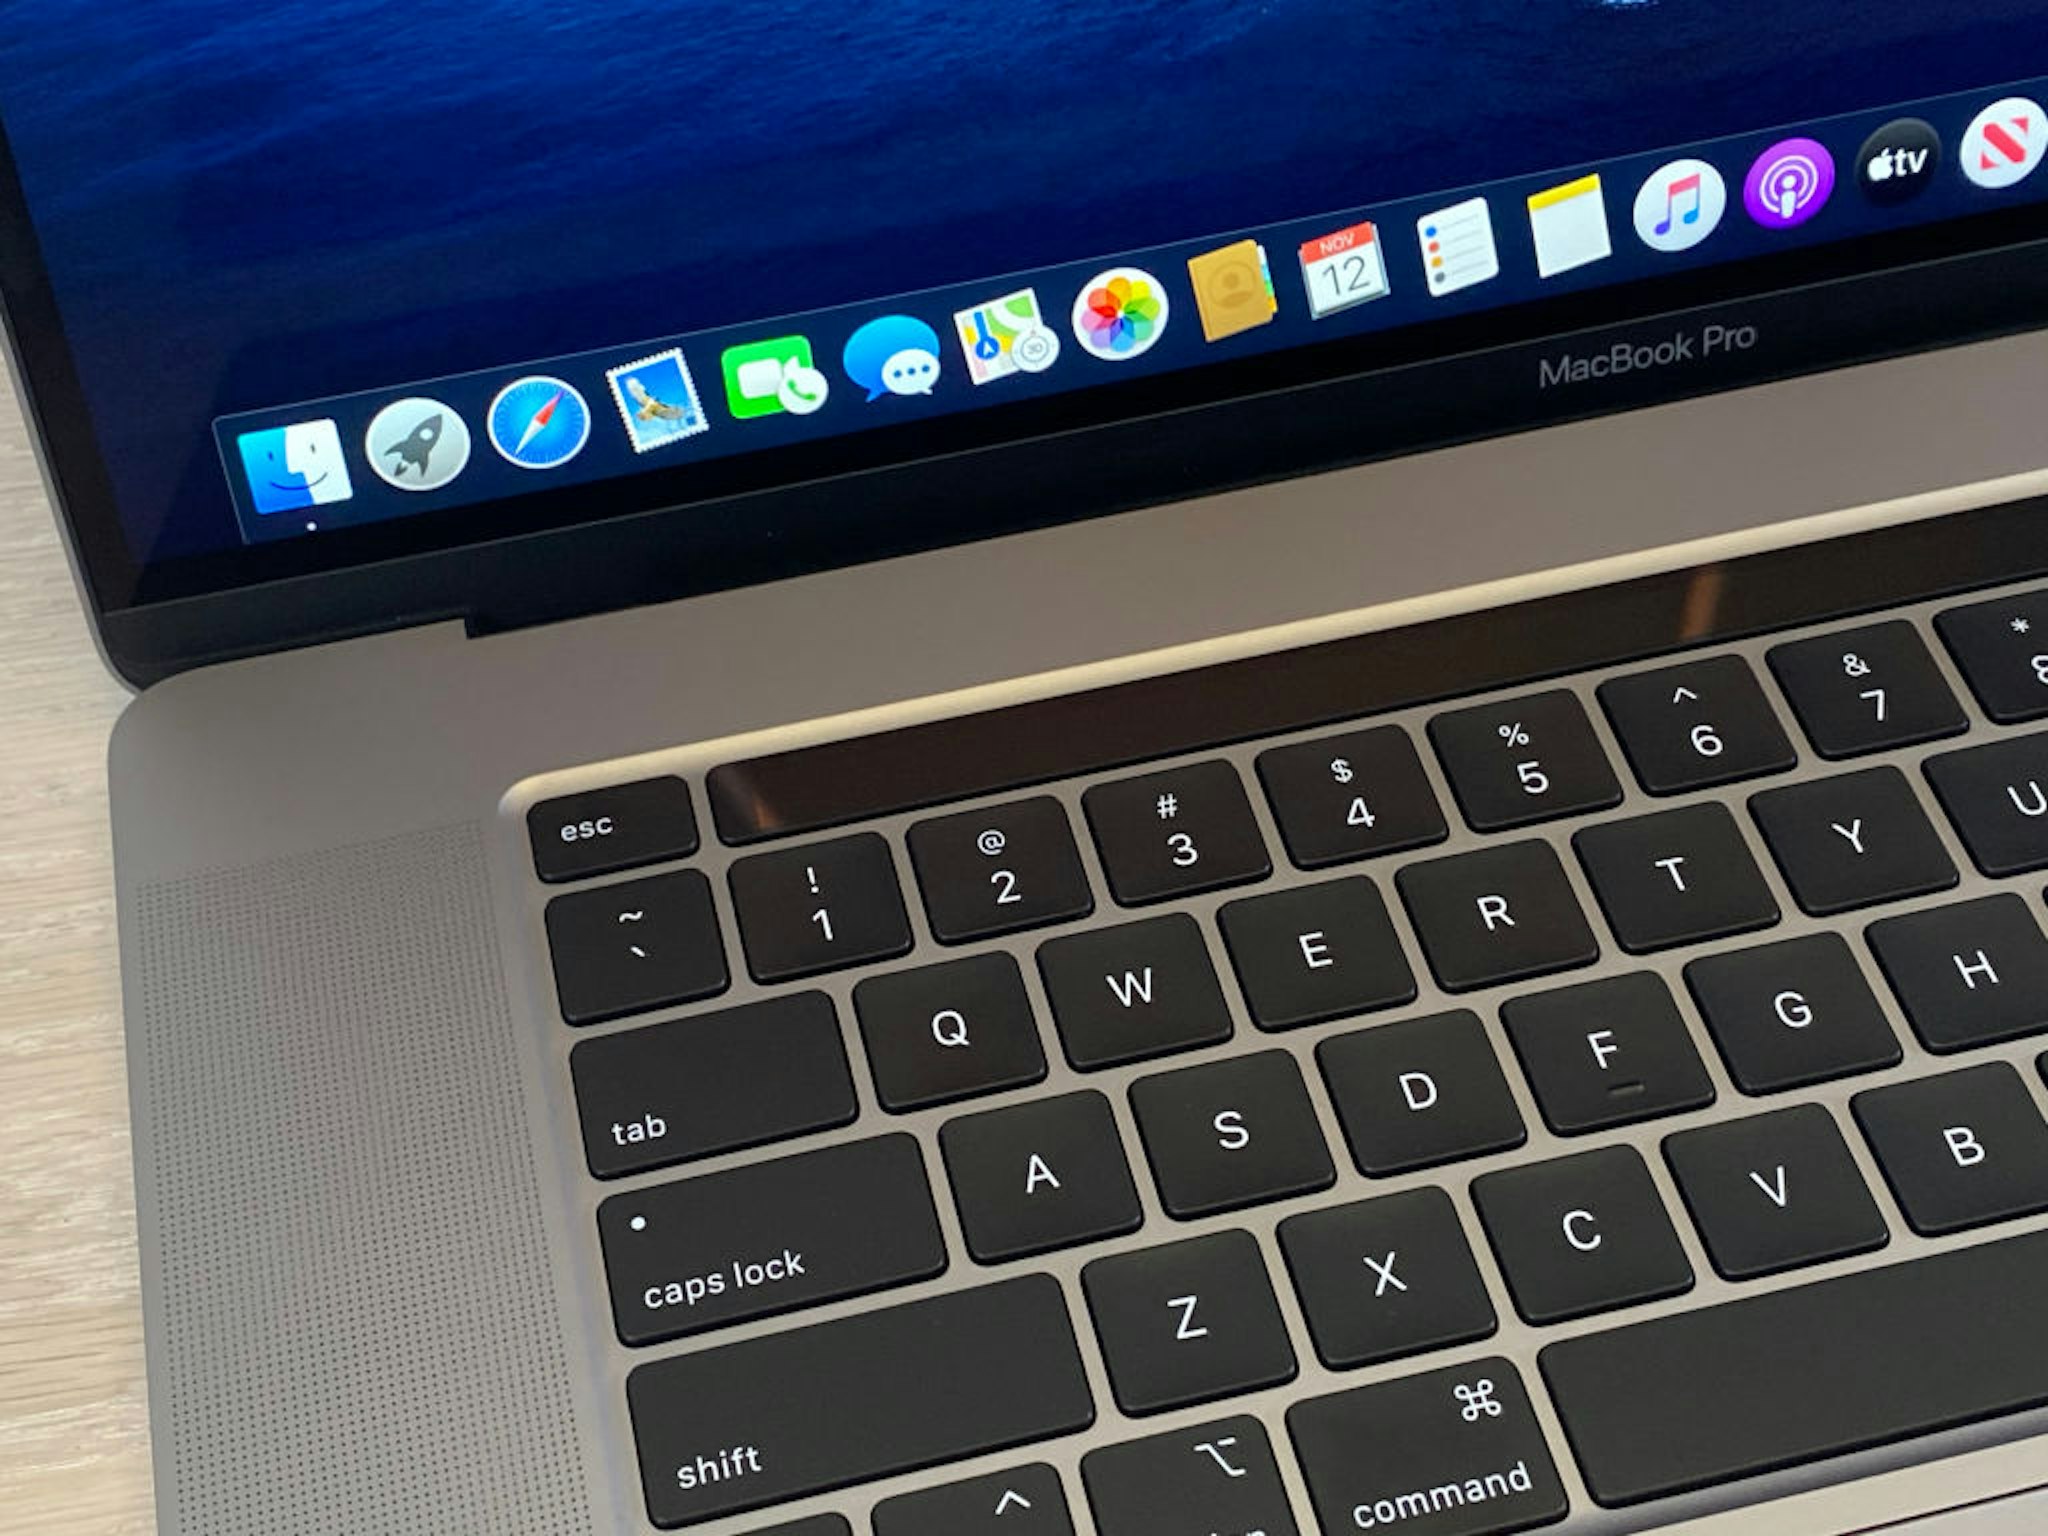 12 November 2019, US, New York: The new MacBook Pro, recorded at an Apple presentation in New York, features a redesigned keyboard, a sophisticated sound system, and a 16-inch display.